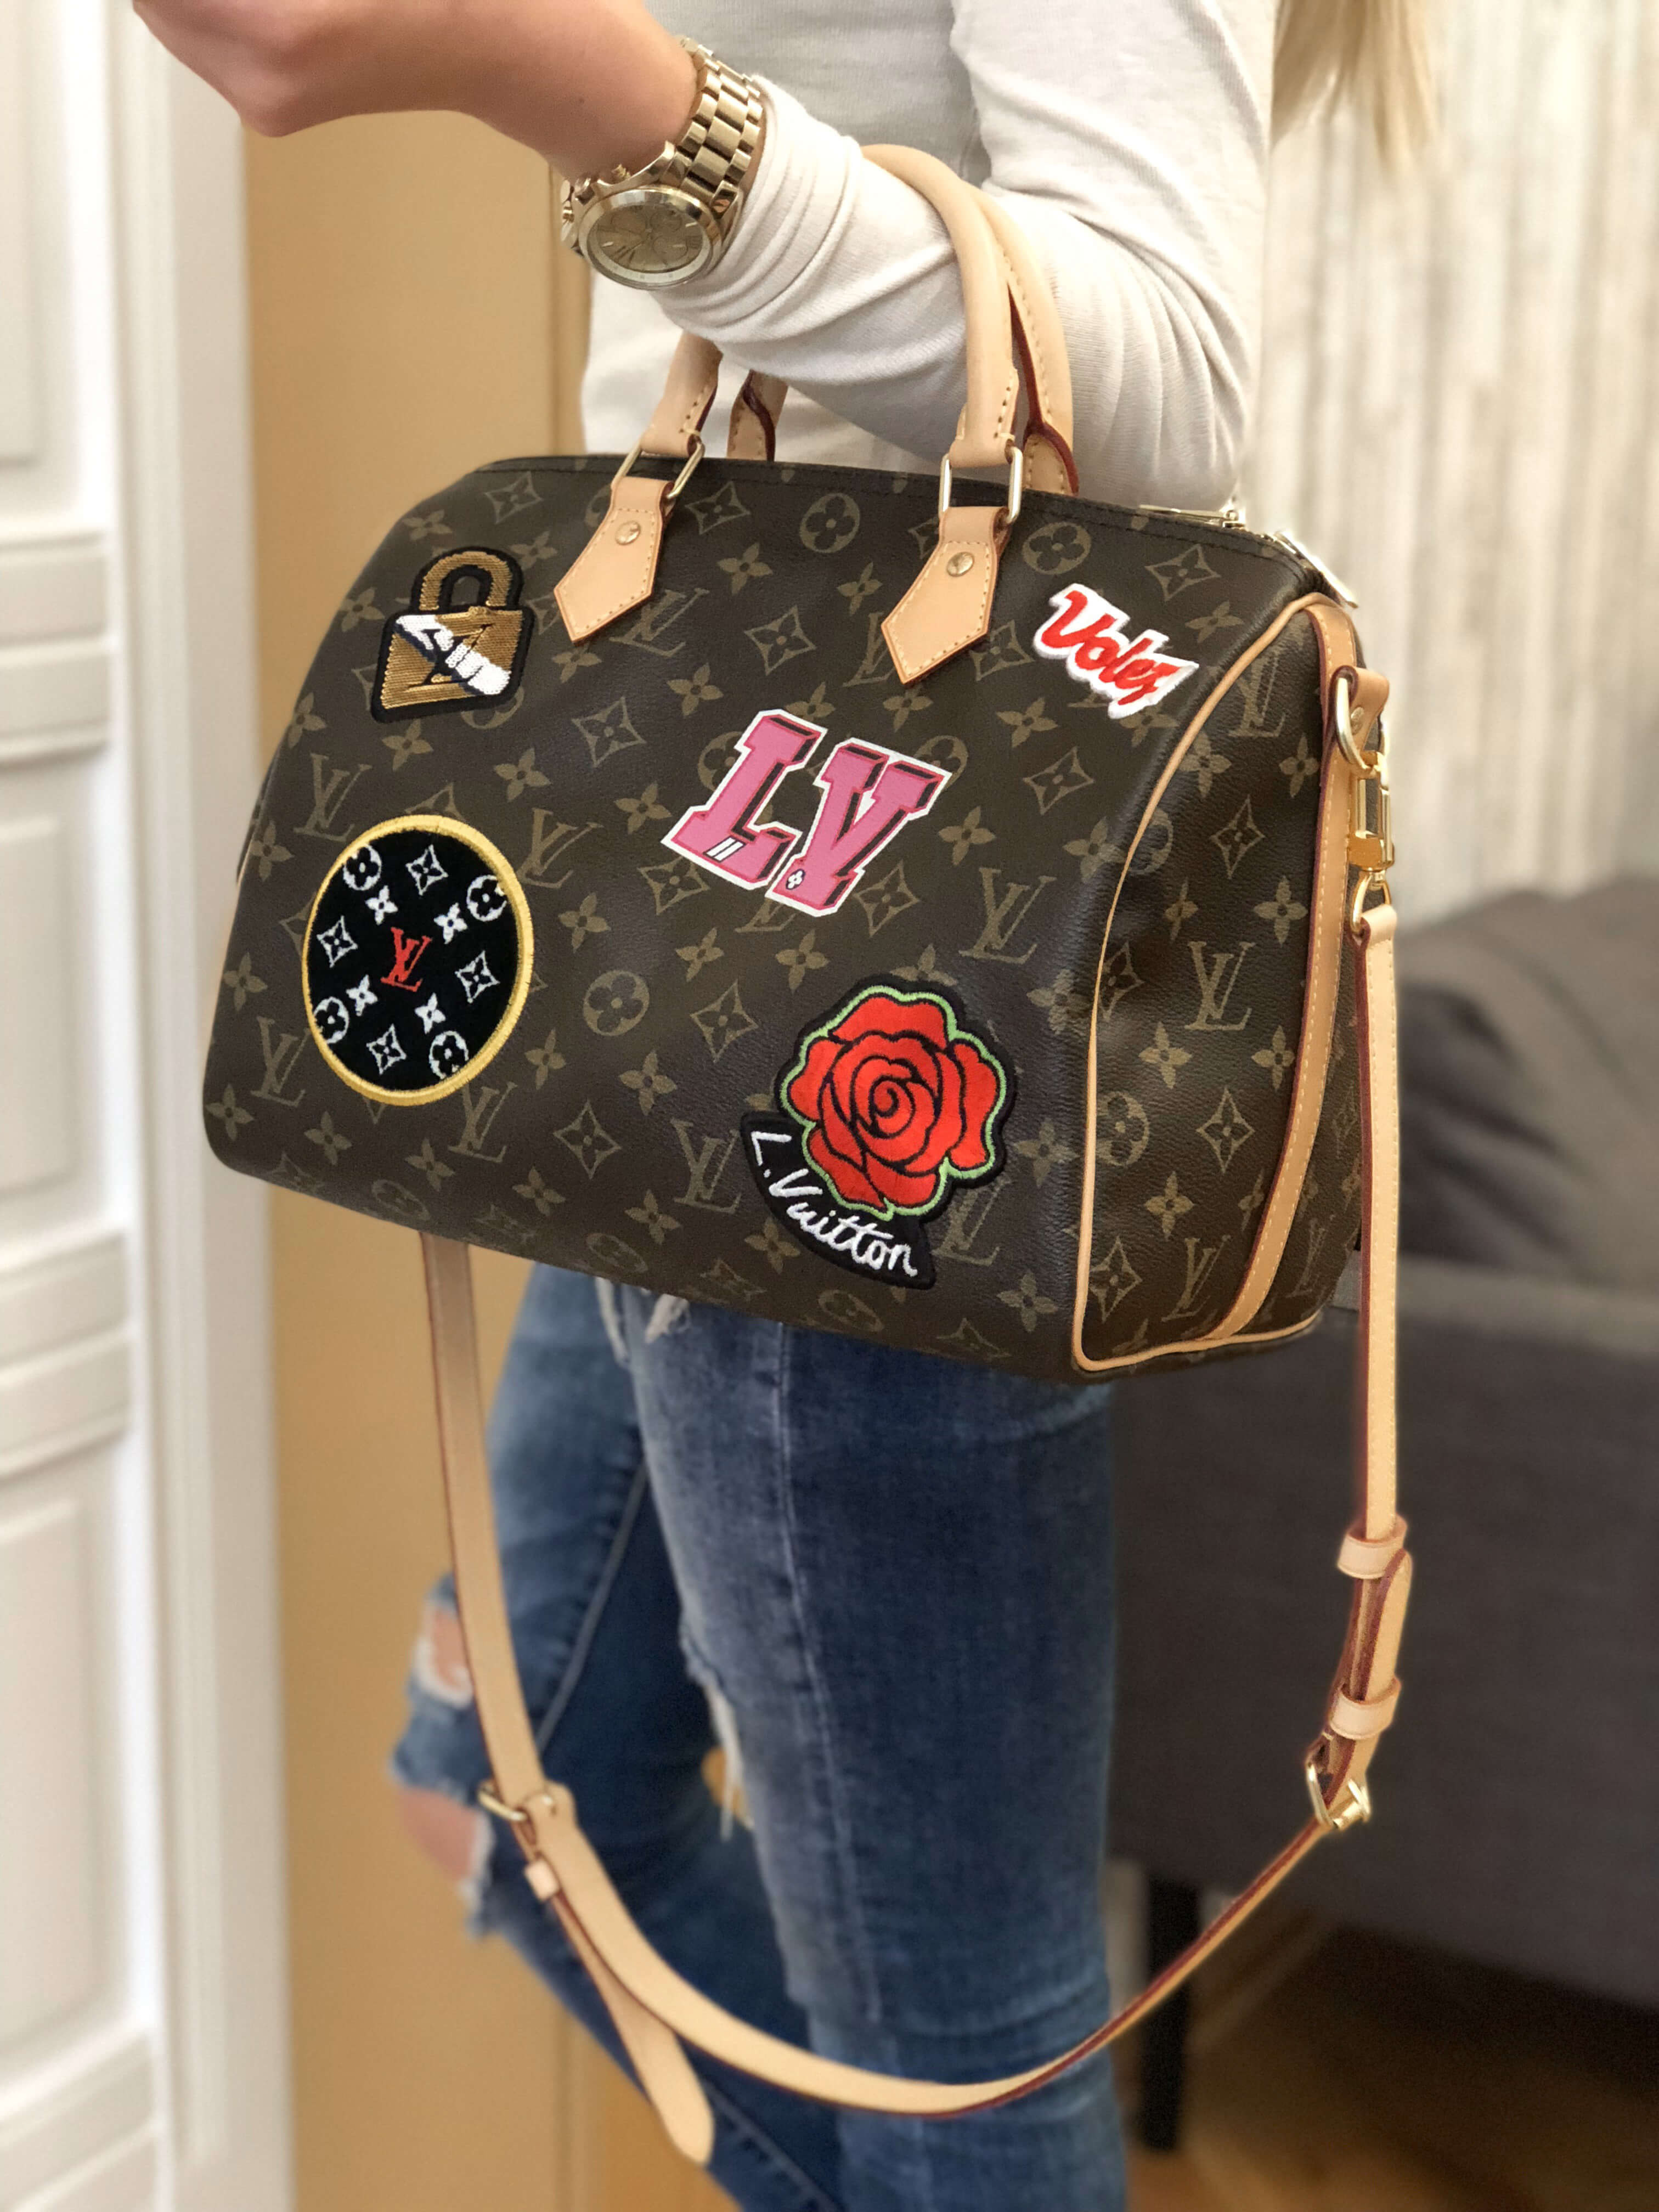 LOUIS VUITTON, PATCHES SPEEDY 30 BANDOULIERE OF DAMIER EBENE CANVAS WITH  POLISHED BRASS HARDWARE, Handbags & Accessories, 2020